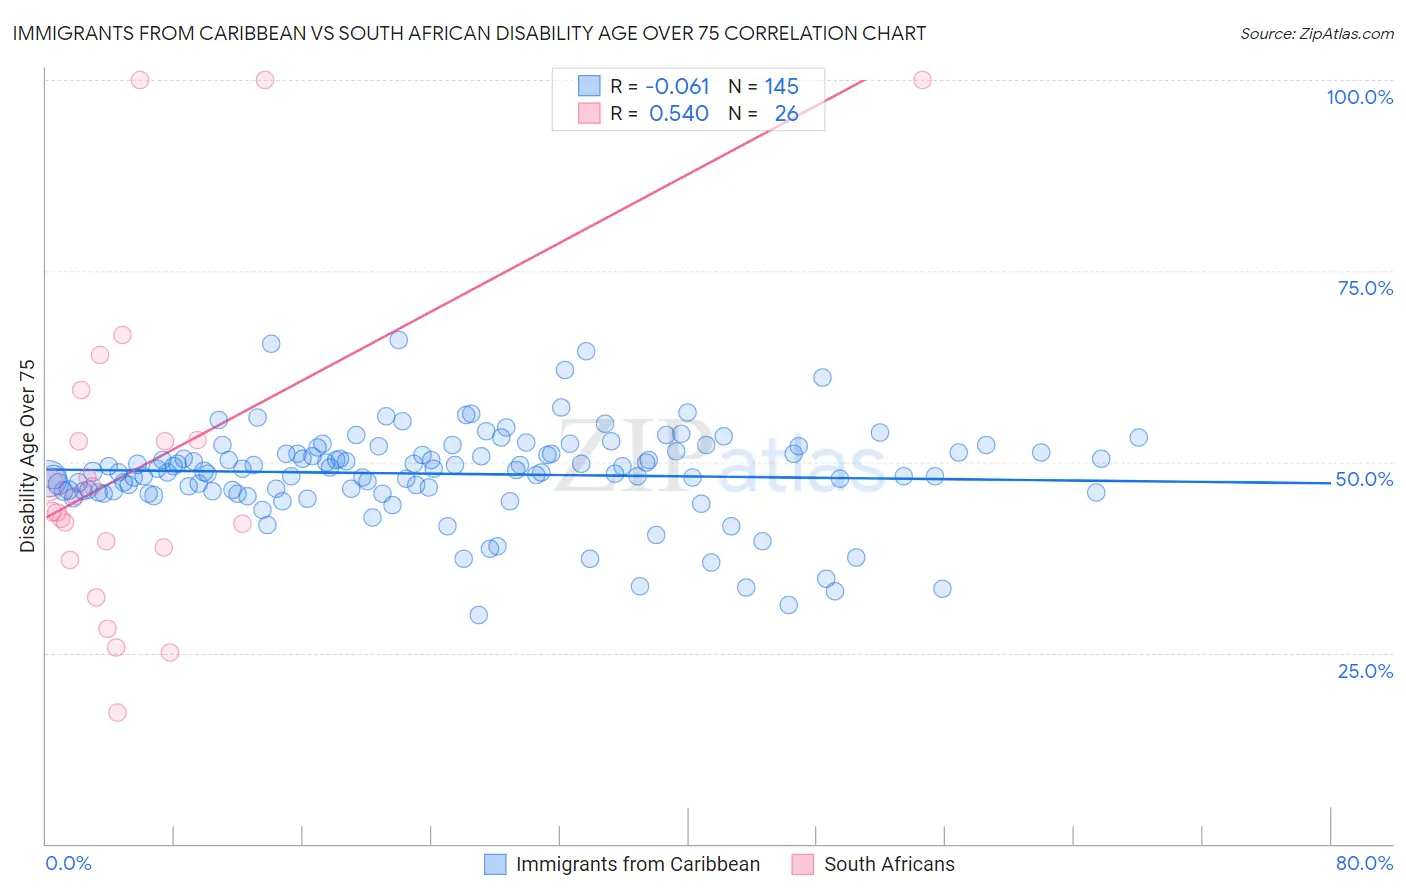 Immigrants from Caribbean vs South African Disability Age Over 75